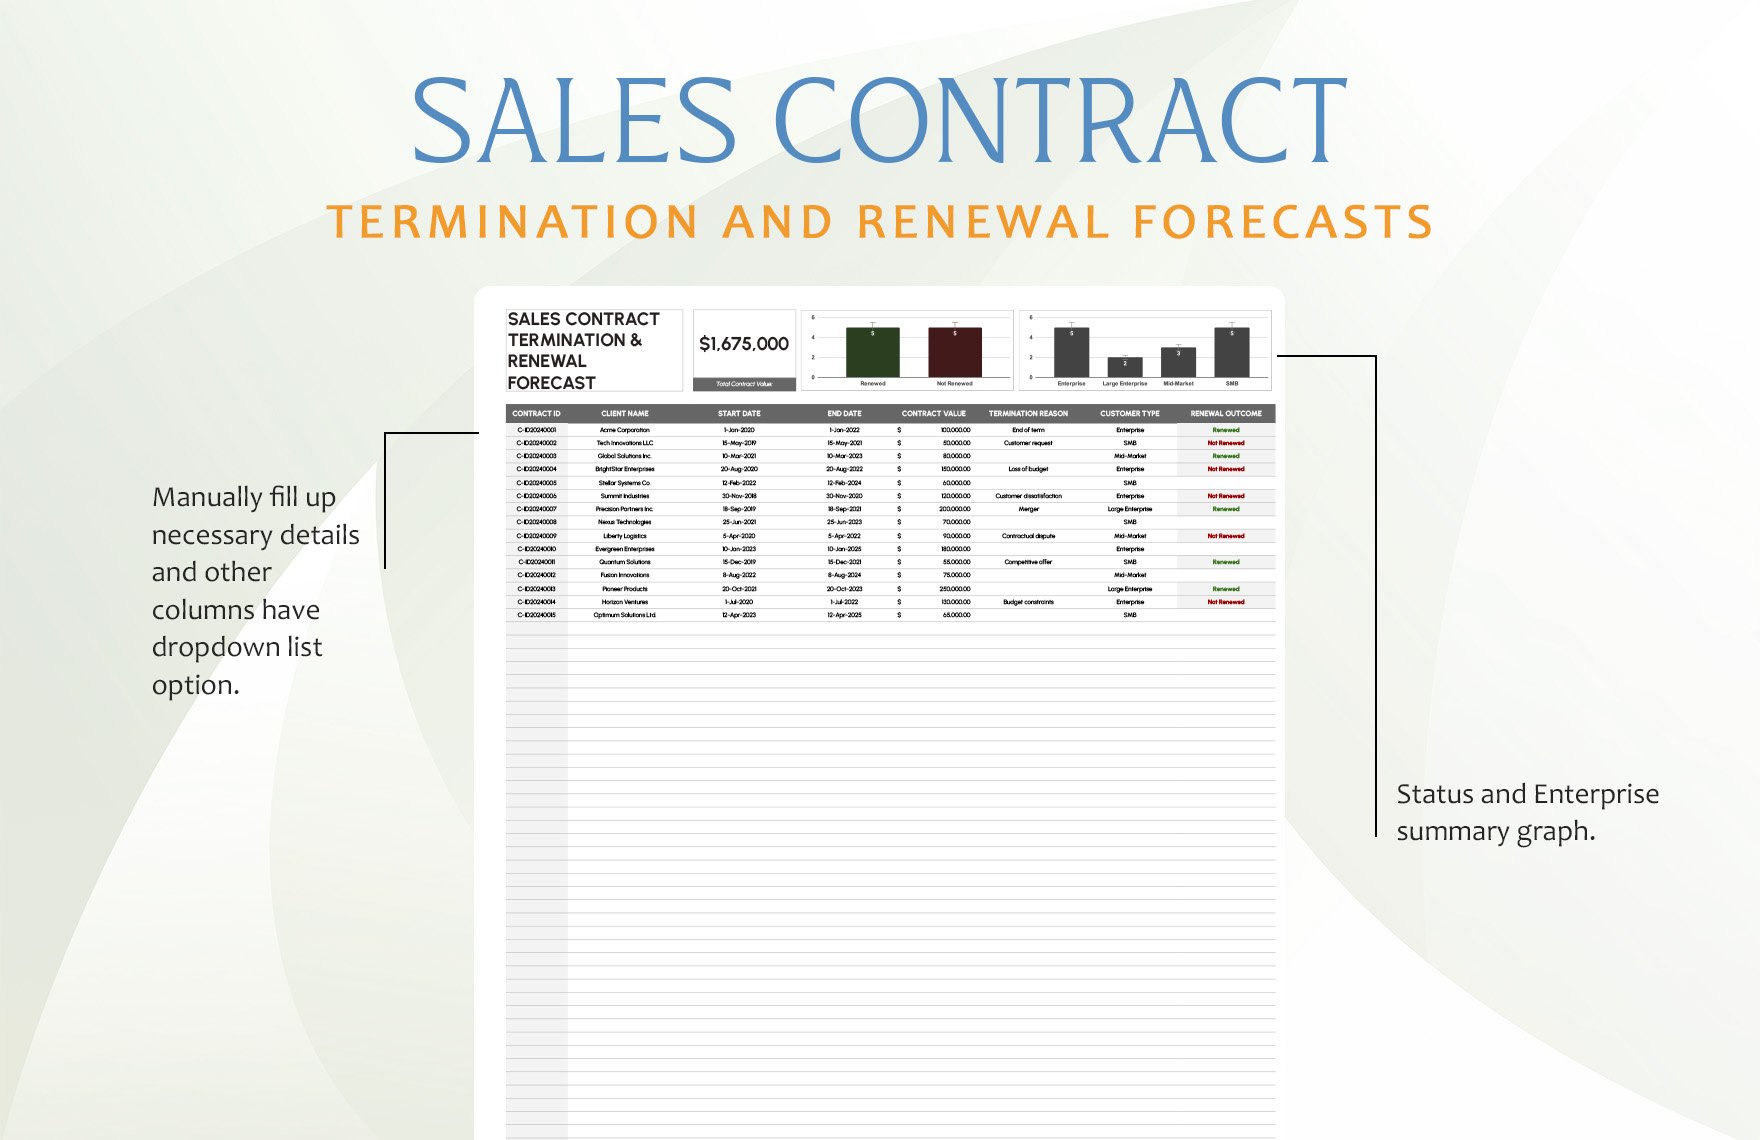 Sales Contract Termination and Renewal Forecasts Template